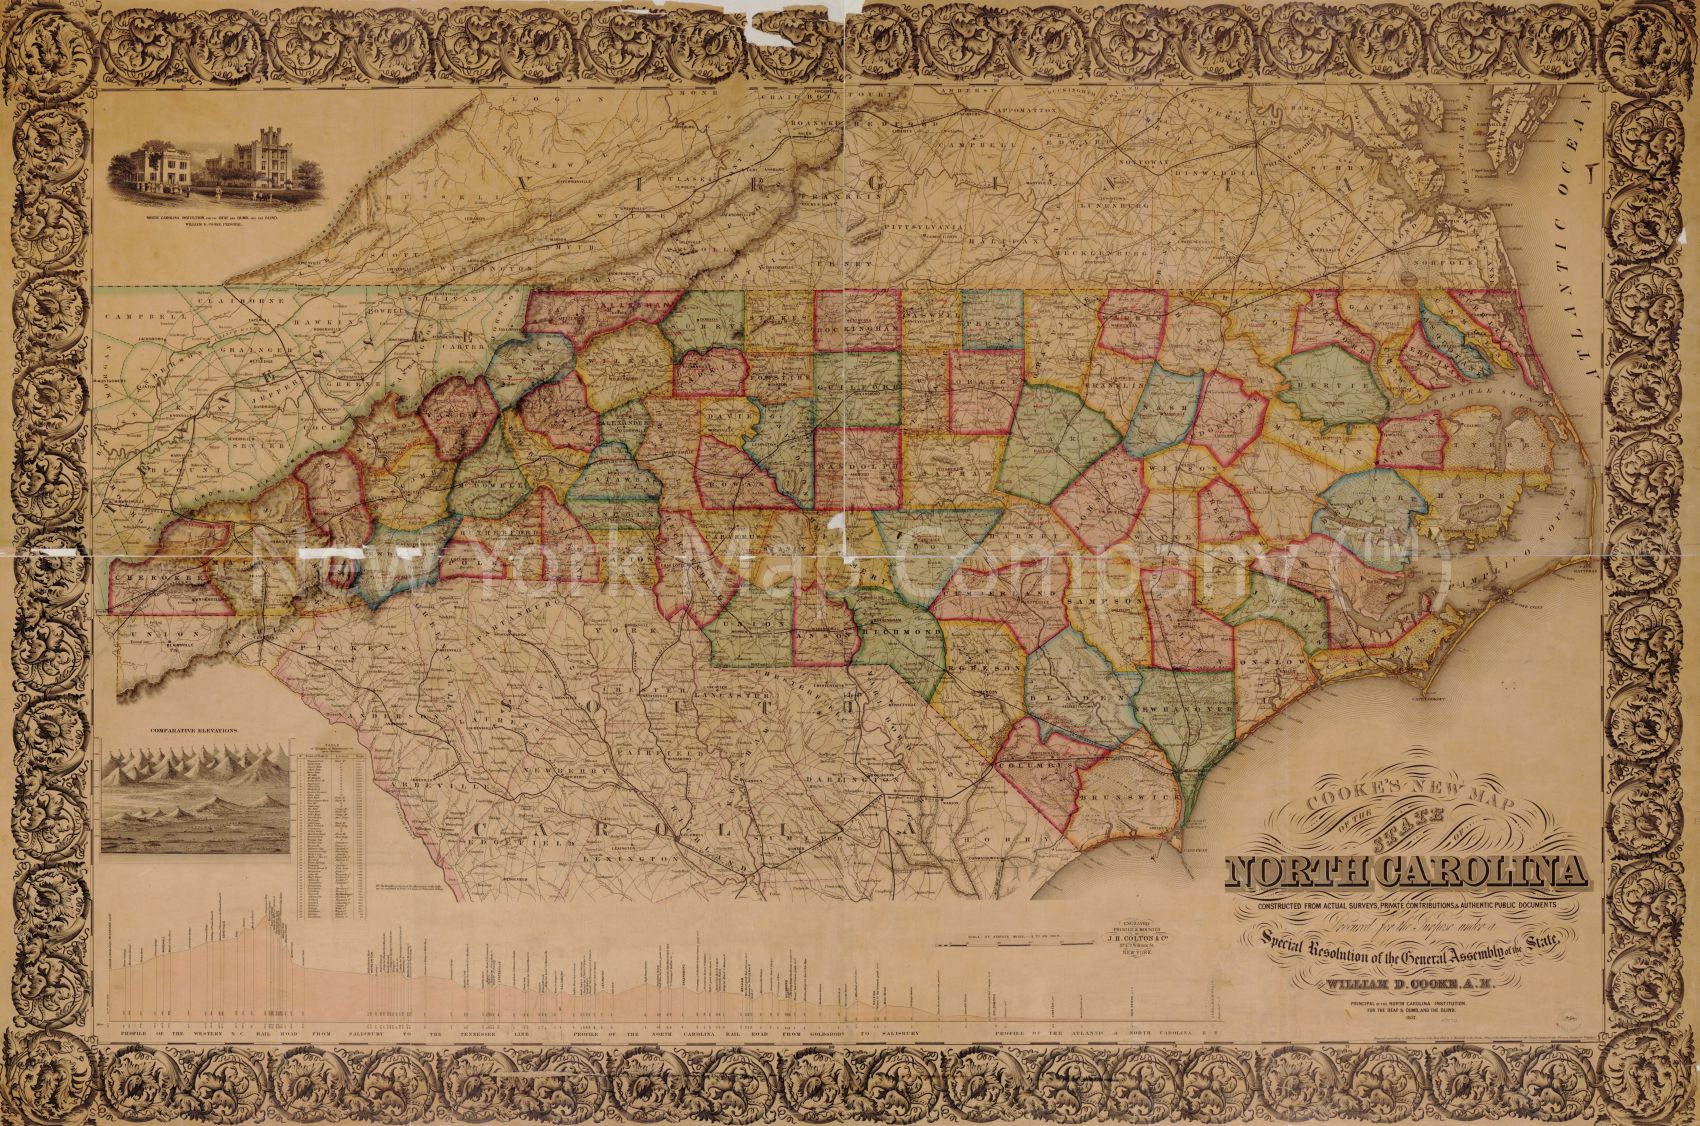 1857 map Cooke's new map of the state of North Carolina: constructed from actual surveys, private contributions and authentic public documents procured for the purpose under a special resolution of the General Assembly of the state. Map Subjects: Atlanti